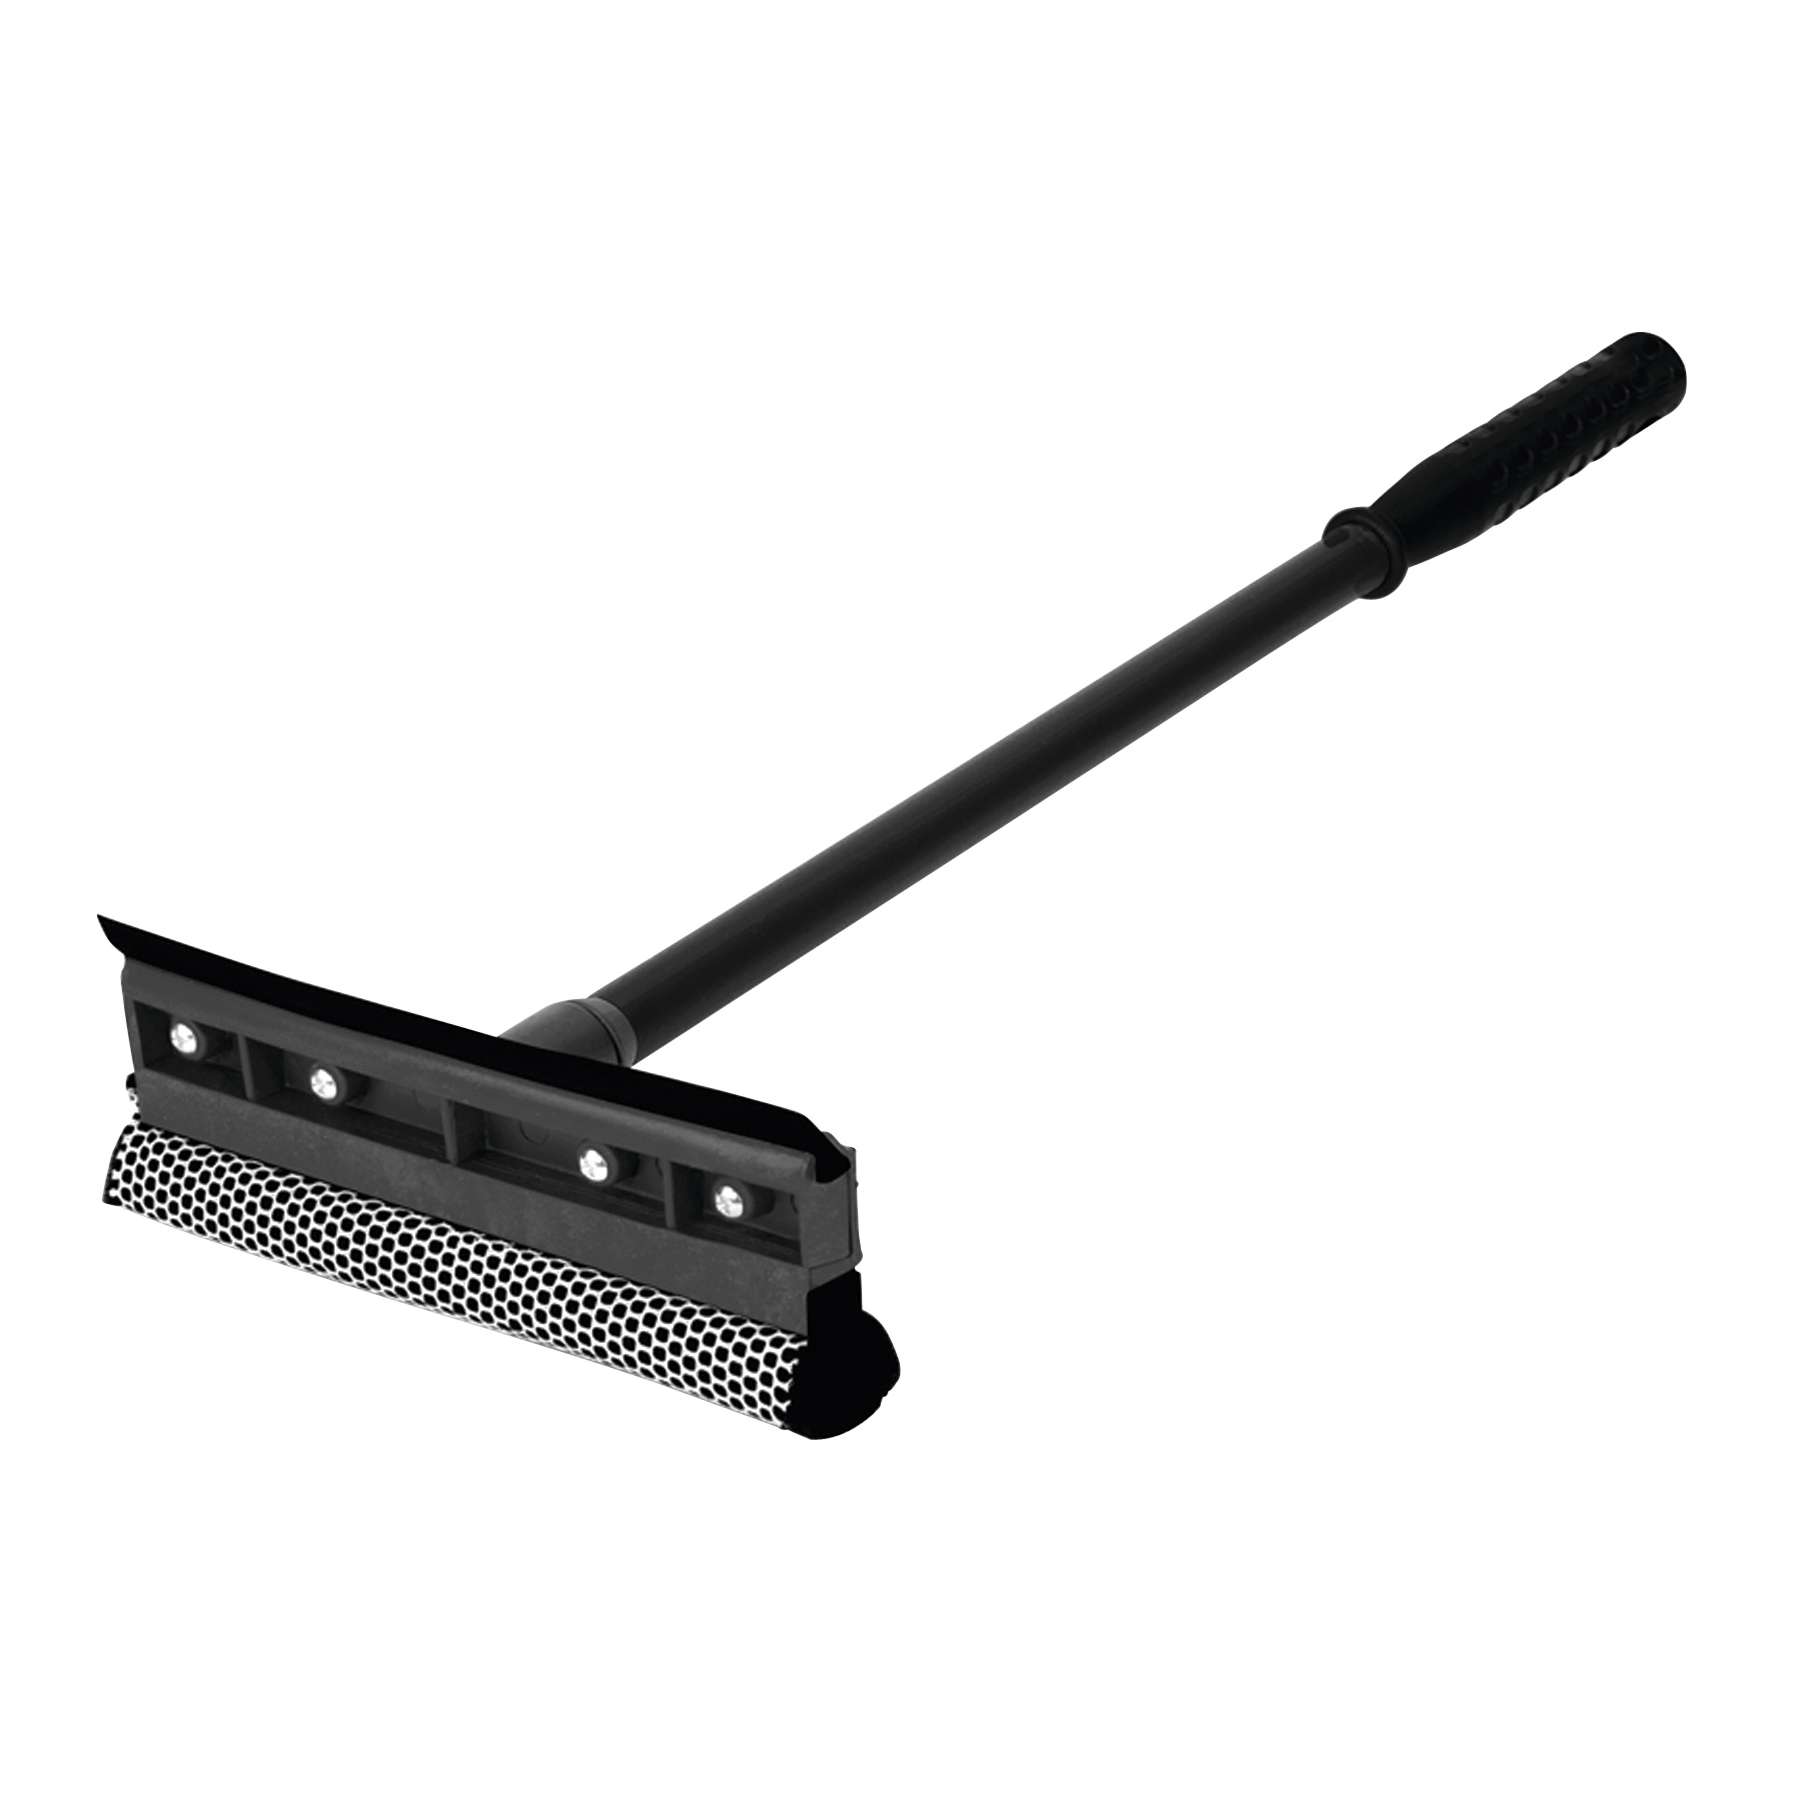 965250 Auto-Squeegee, 8 in Blade, 12 in OAL